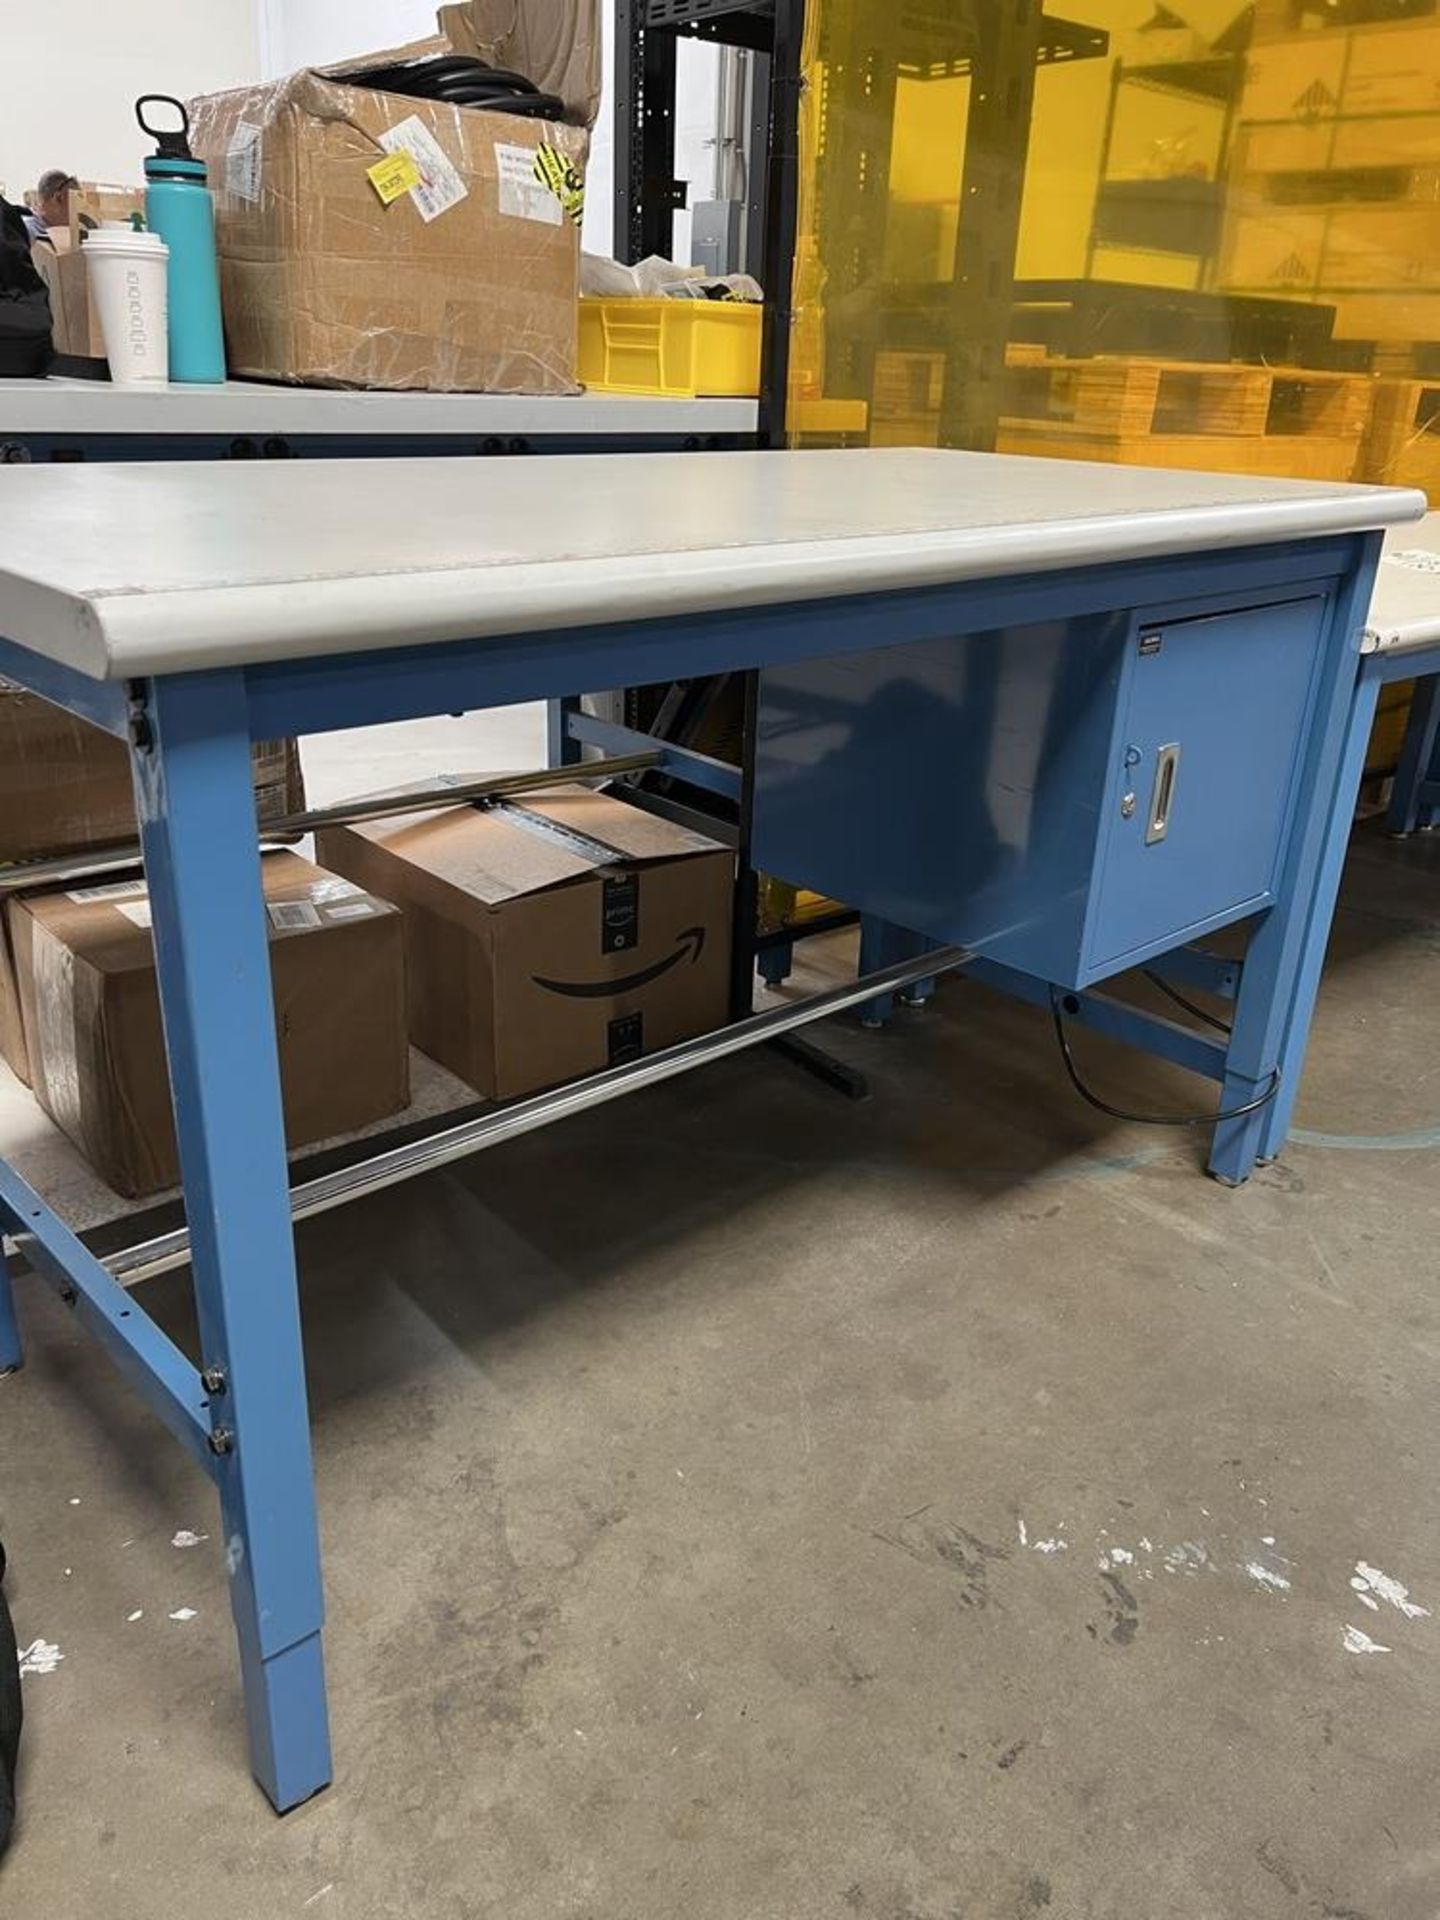 Global Industrial Adjustable Work Table With Cabinet & Power Strip 60" x 30" x 36" - Image 2 of 5